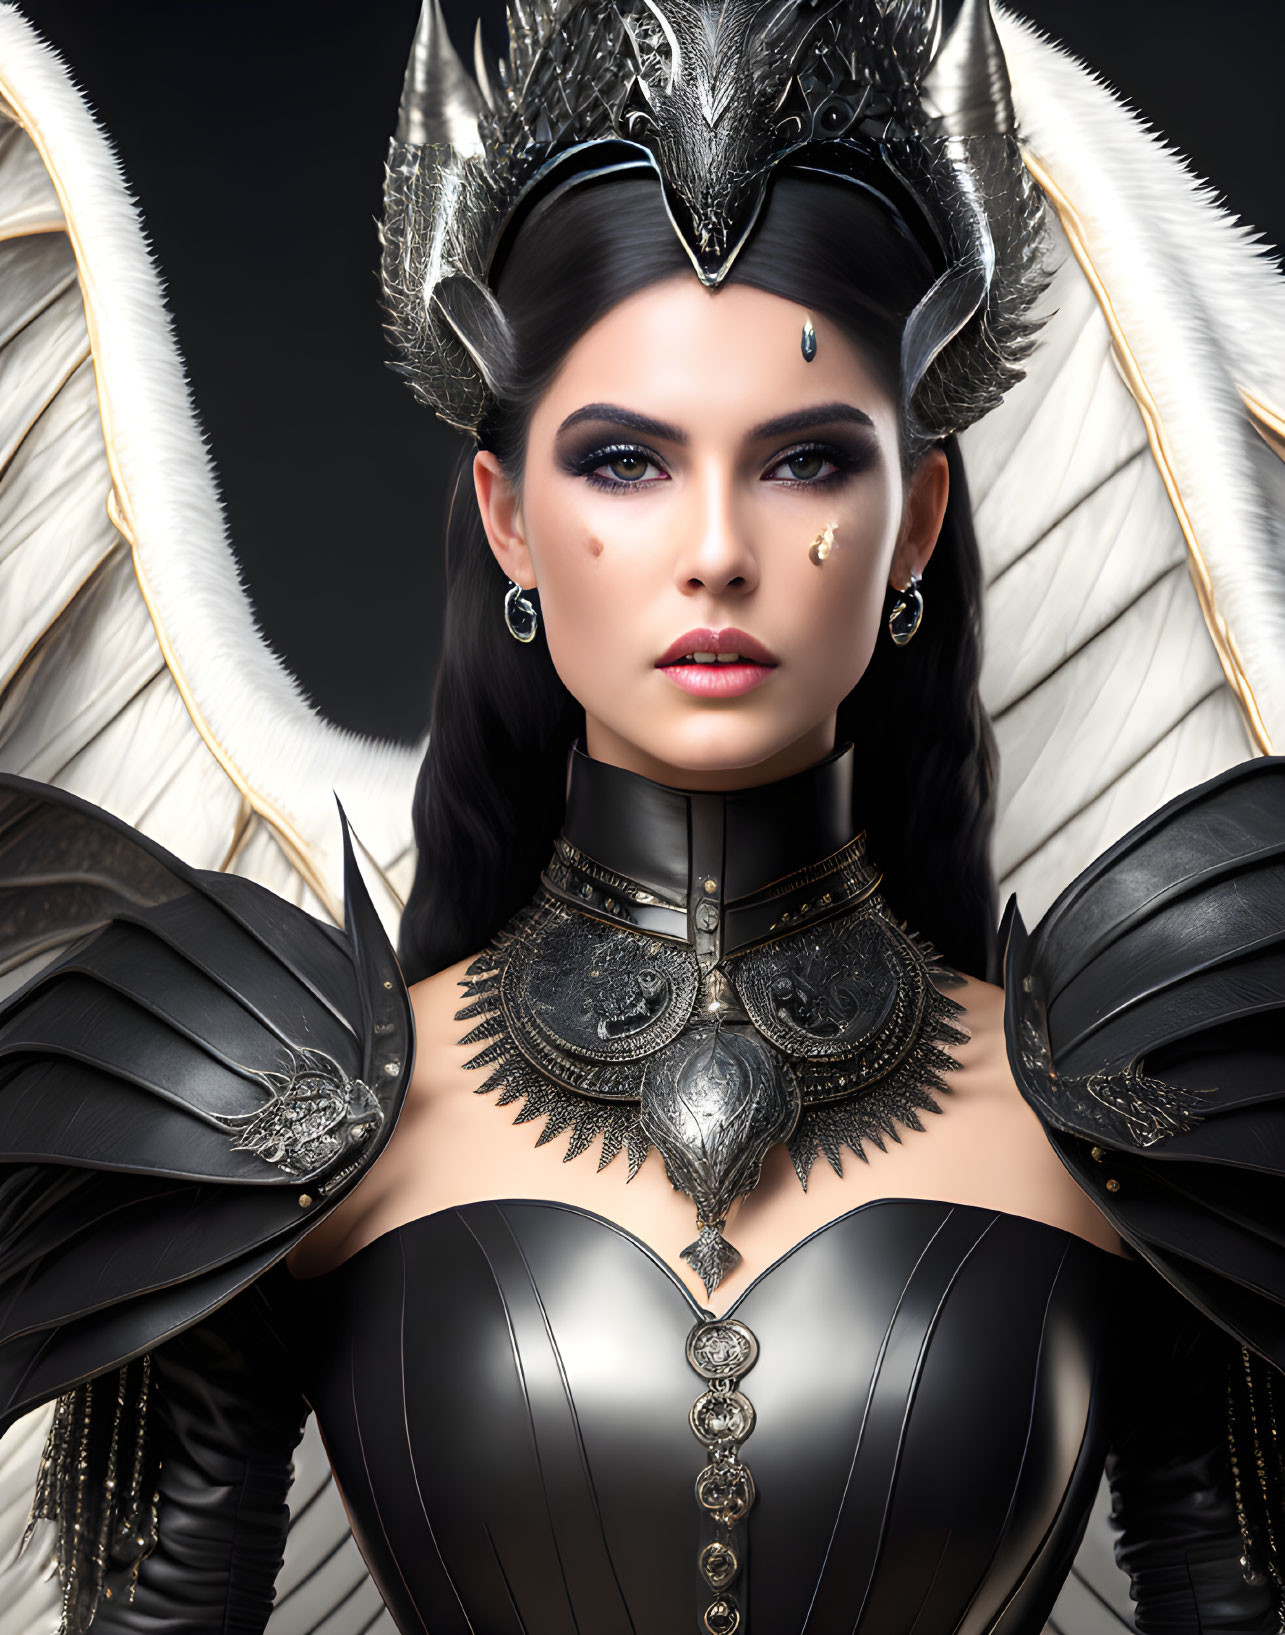 Regal woman in dark fantasy armor with feathered collar and metallic crown